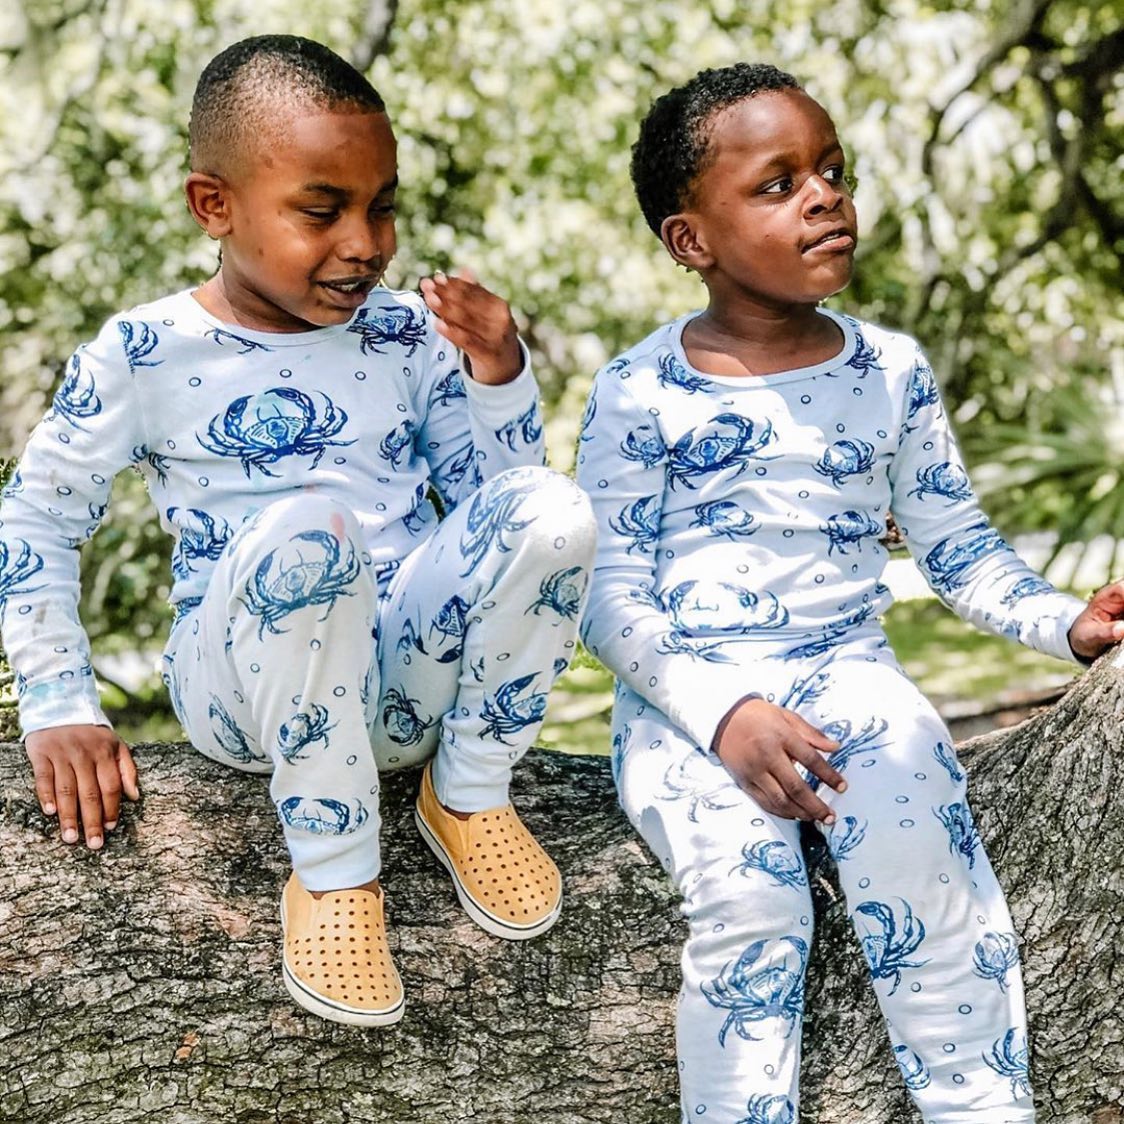 Blue Crab Pajamas by Little Hometown